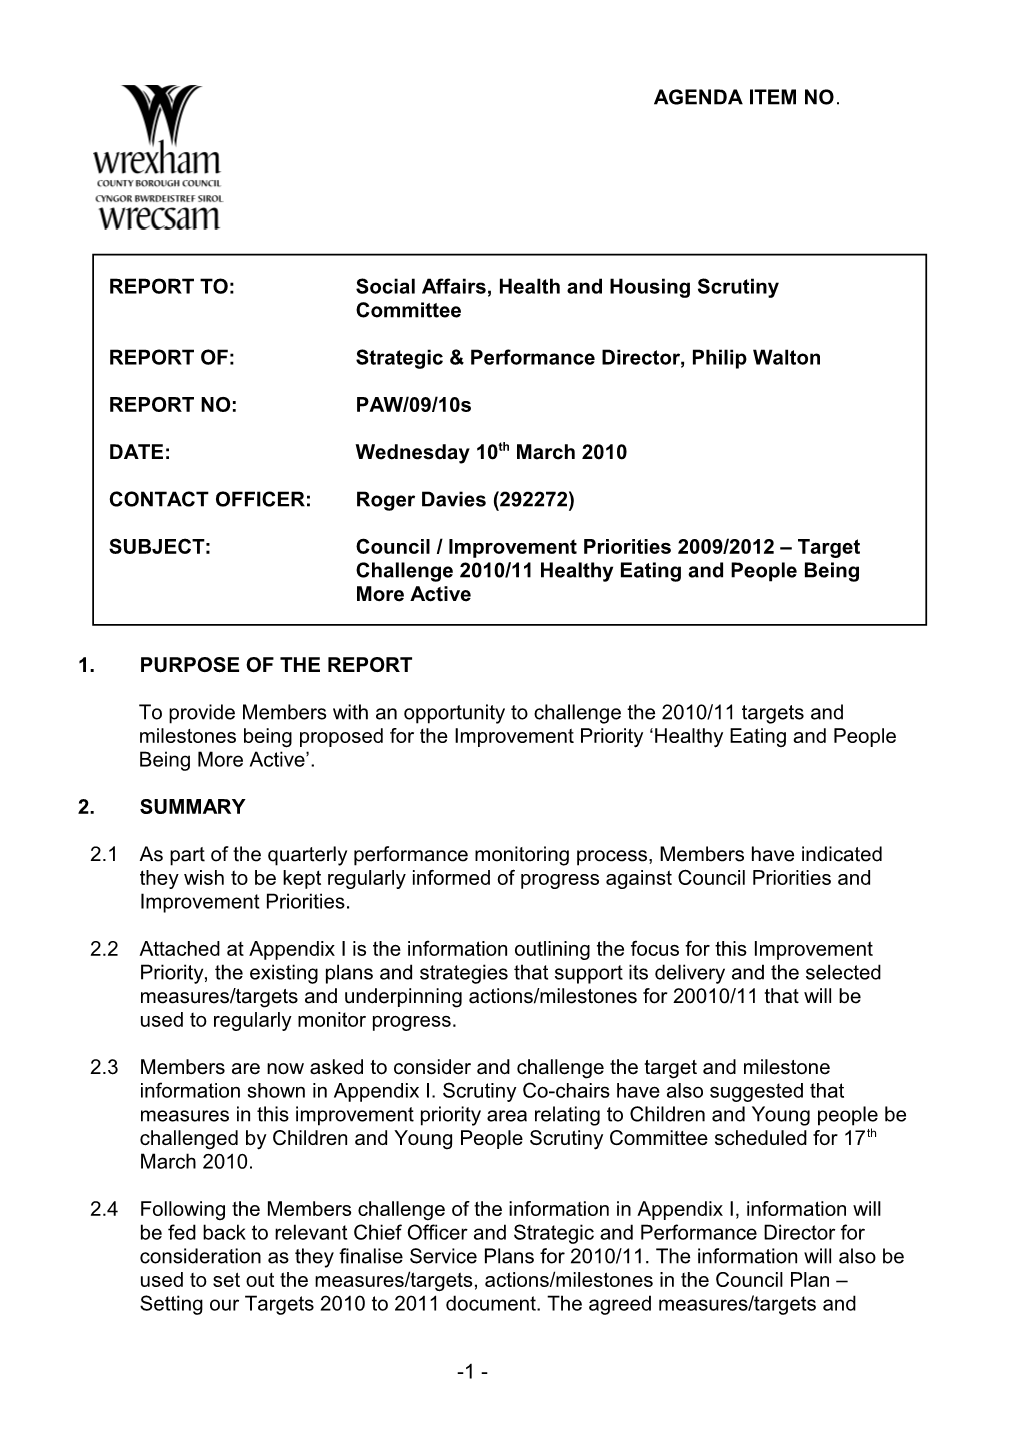 REPORT TO:Social Affairs, Health and Housing Scrutiny Committee